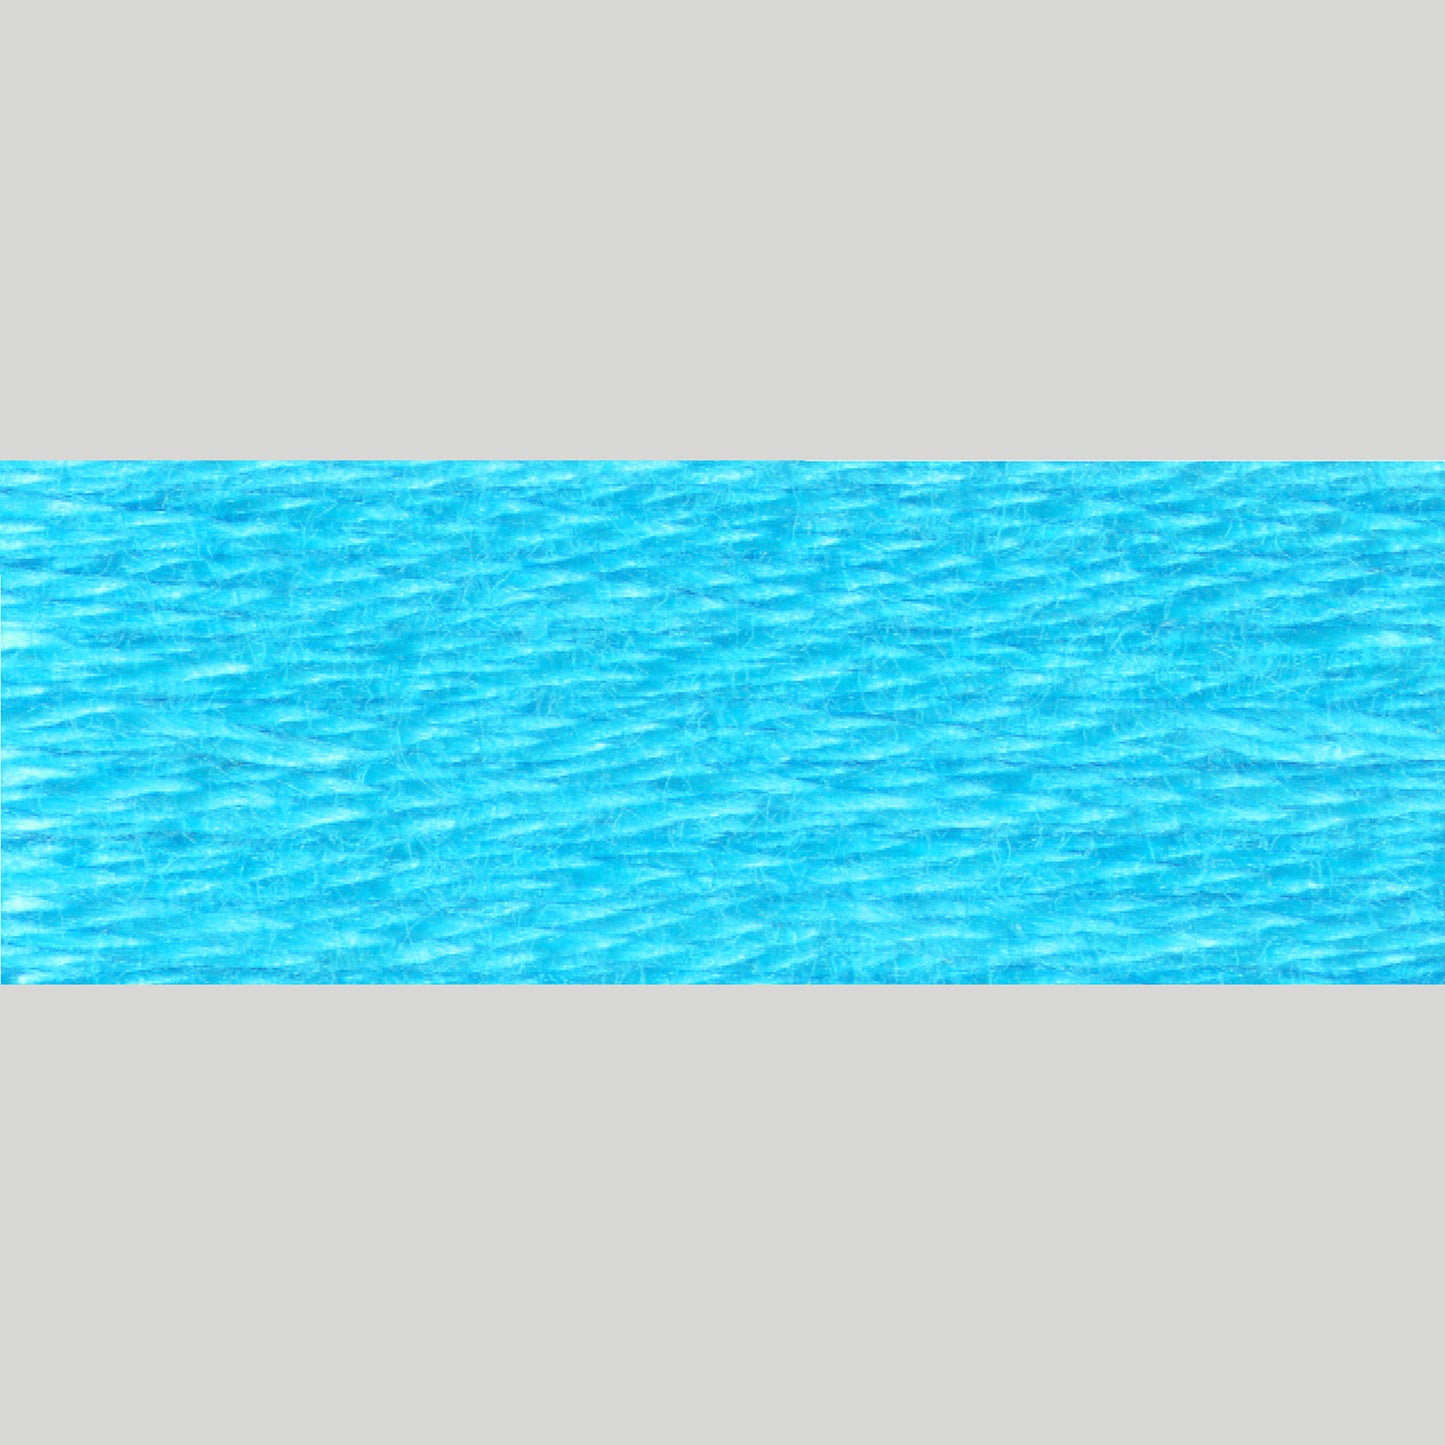 DMC Embroidery Floss - 3846 Light Bright Turquoise Alternative View #1